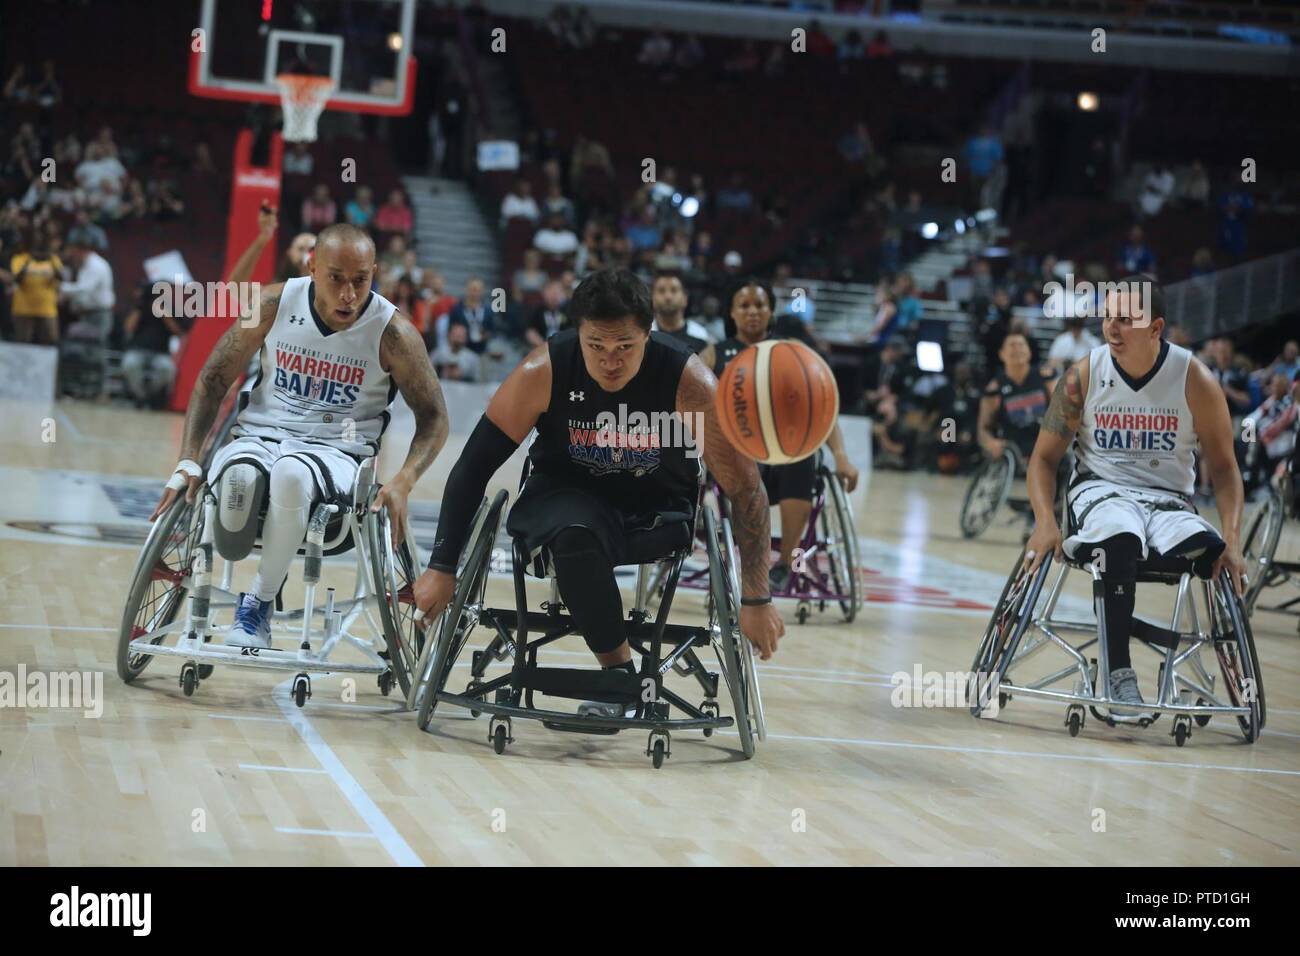 U.S. Army veteran Jarred Vaina, from American Samoa, goes after the basketball during the wheelchair  competition for the 2017 Department of Defense Warrior Games at Chicago, Ill., July 7, 2017. The DOD Warrior Games are an annual event allowing wounded, ill and injured service members and veterans in Paralympic-style sports including archery, cycling, field, shooting, sitting volleyball, swimming, track and wheelchair basketball. Stock Photo